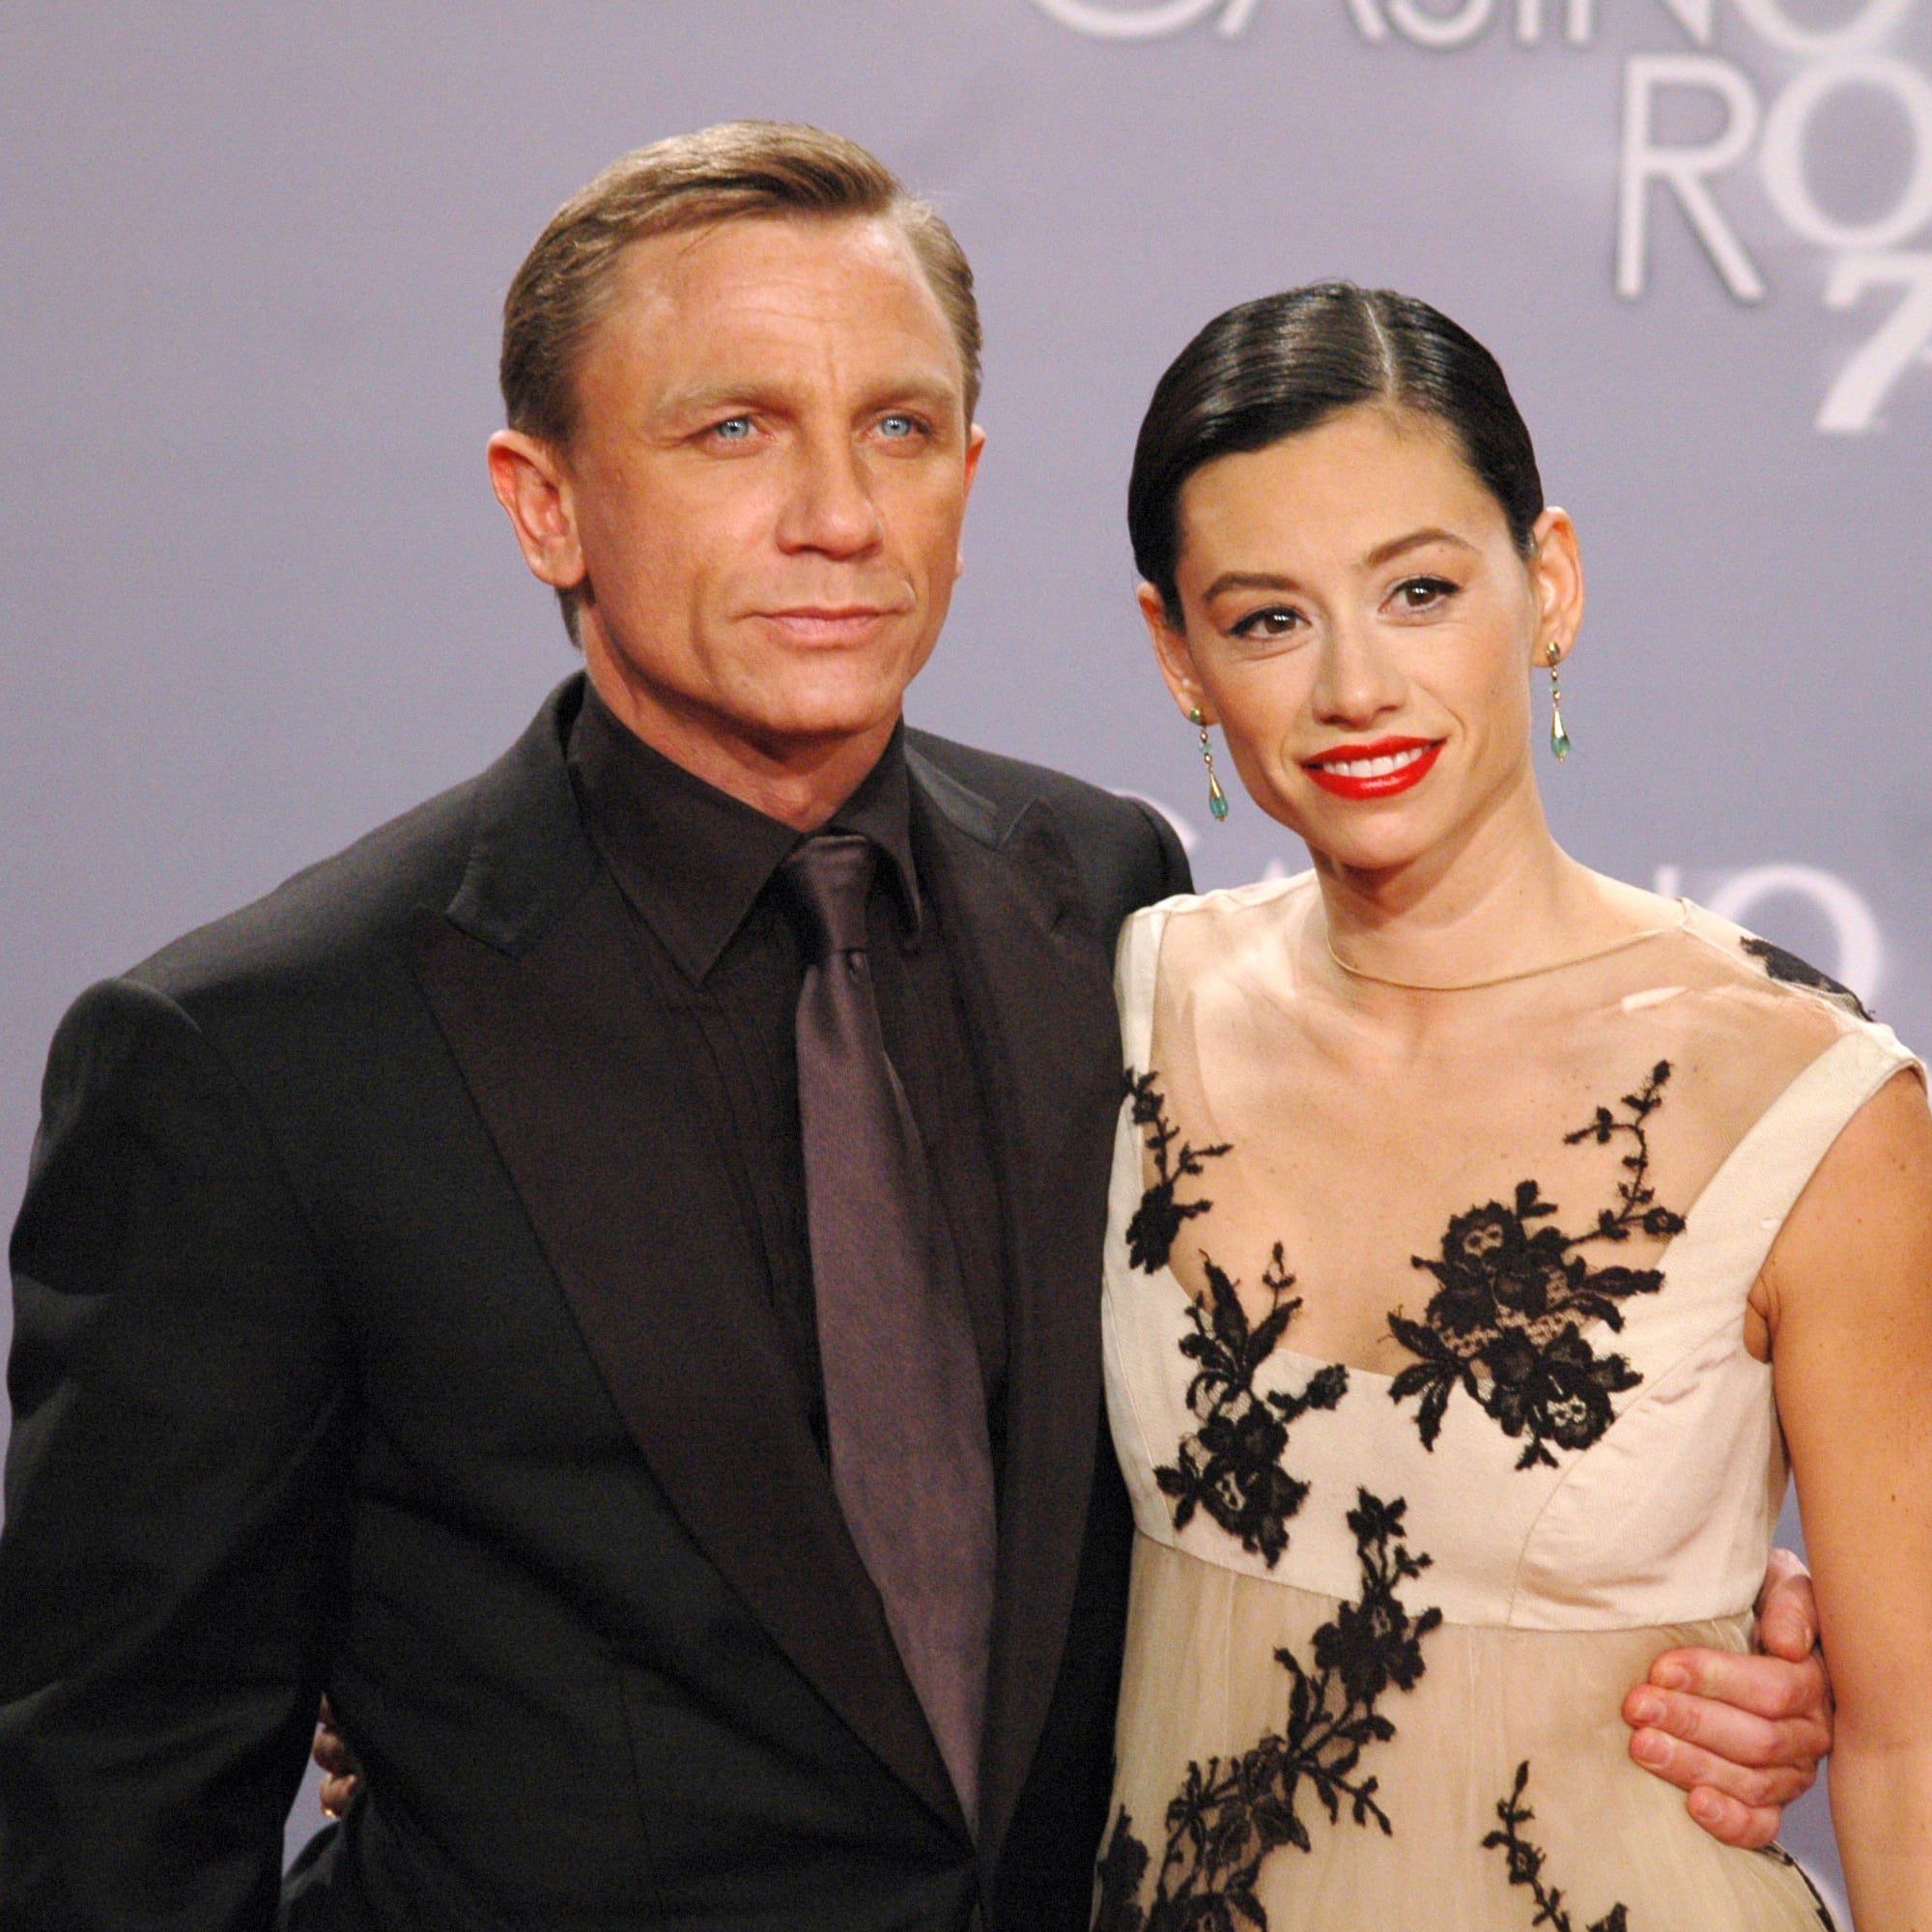 Daniel Craig forced to undergo surgery after being injured on James Bond  set  The Independent  The Independent